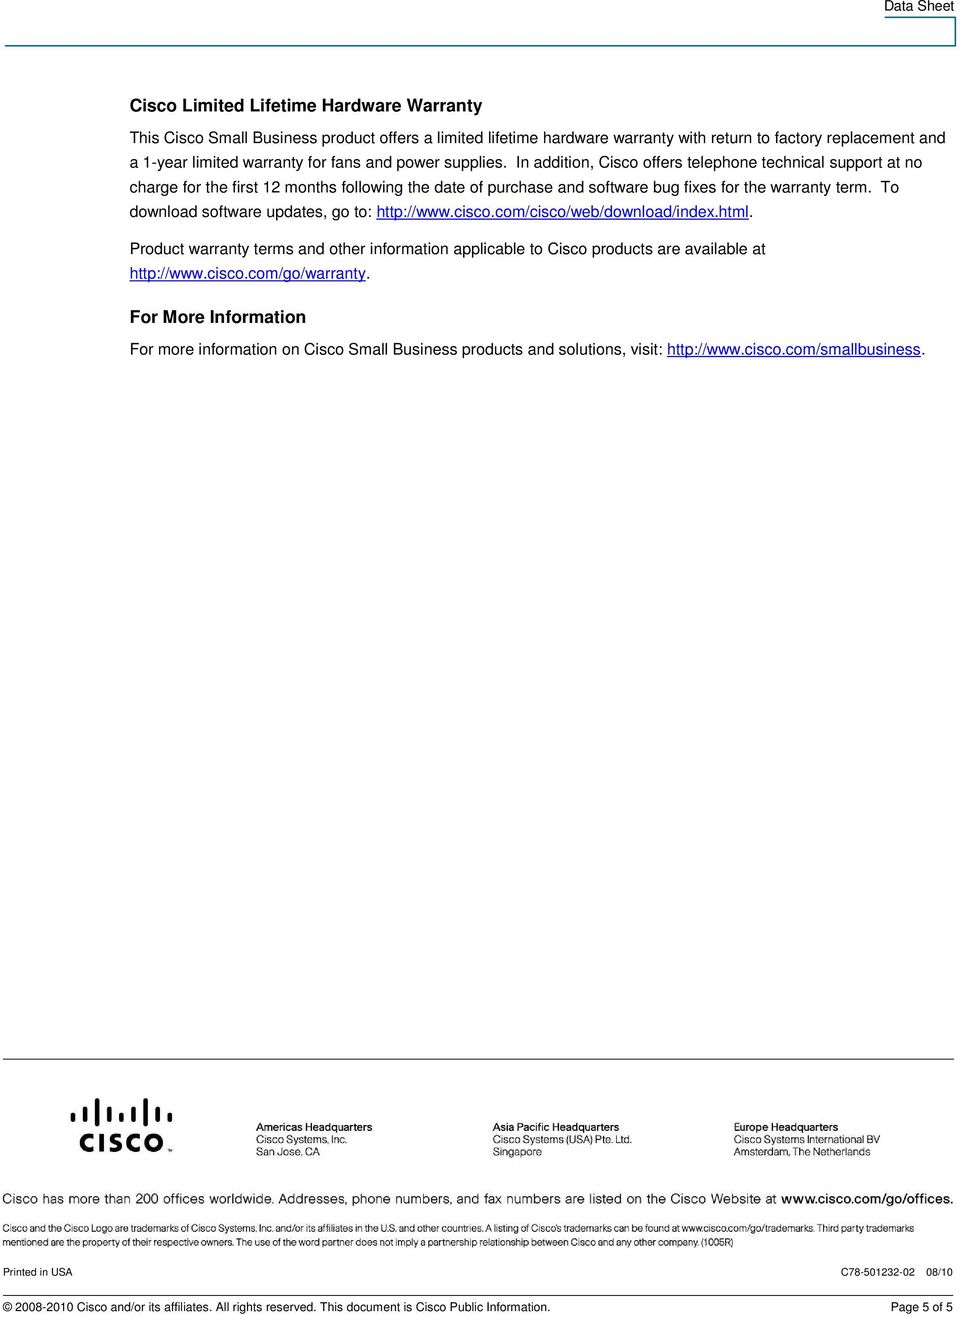 To download software updates, go to: http://www.cisco.com/cisco/web/download/index.html. Product warranty terms and other information applicable to Cisco products are available at http://www.cisco.com/go/warranty.